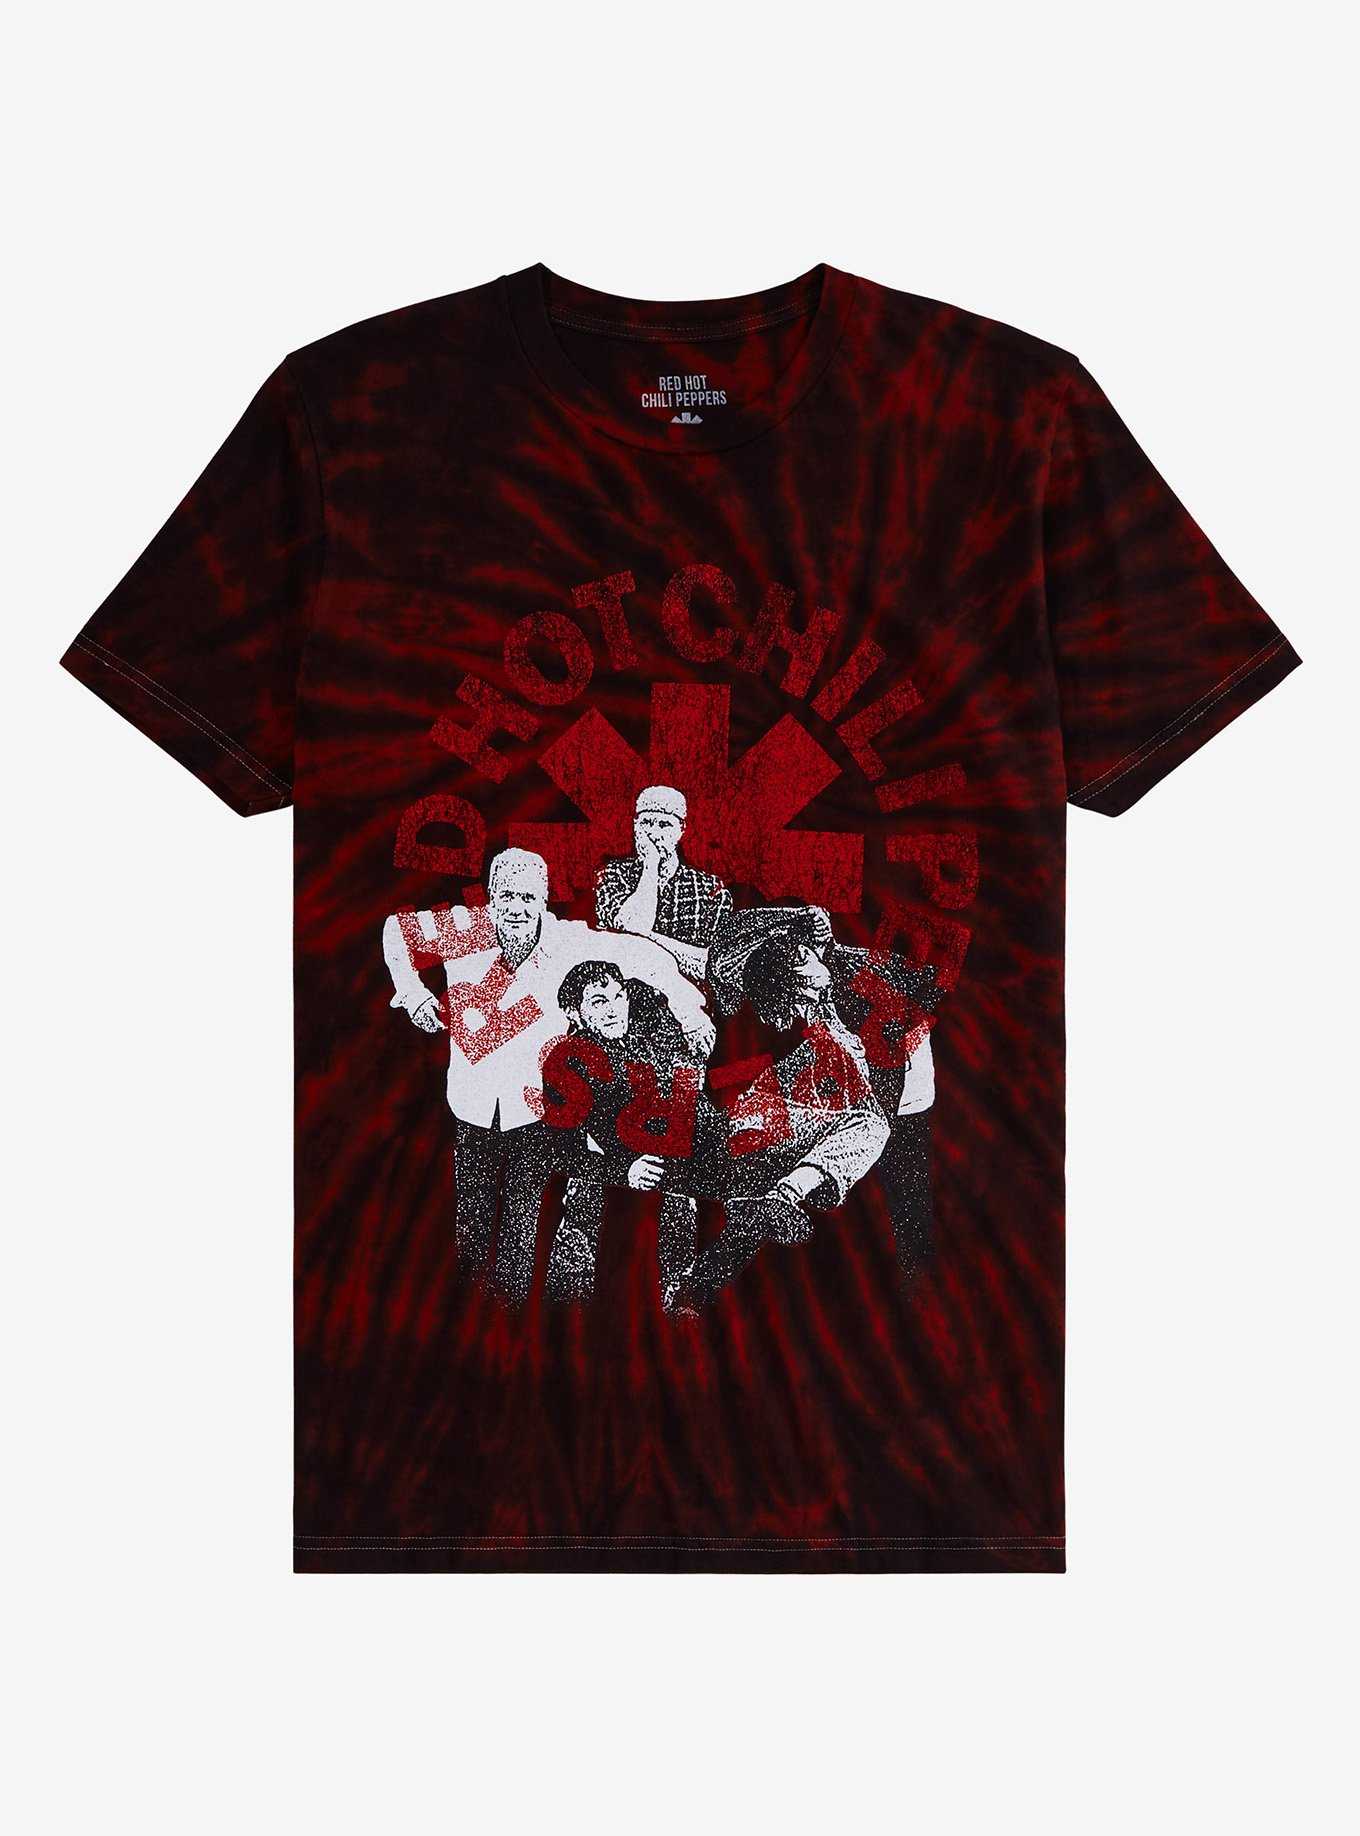 Red Hot Chili Peppers Band Portrait Tie-Dye T-Shirt, , hi-res